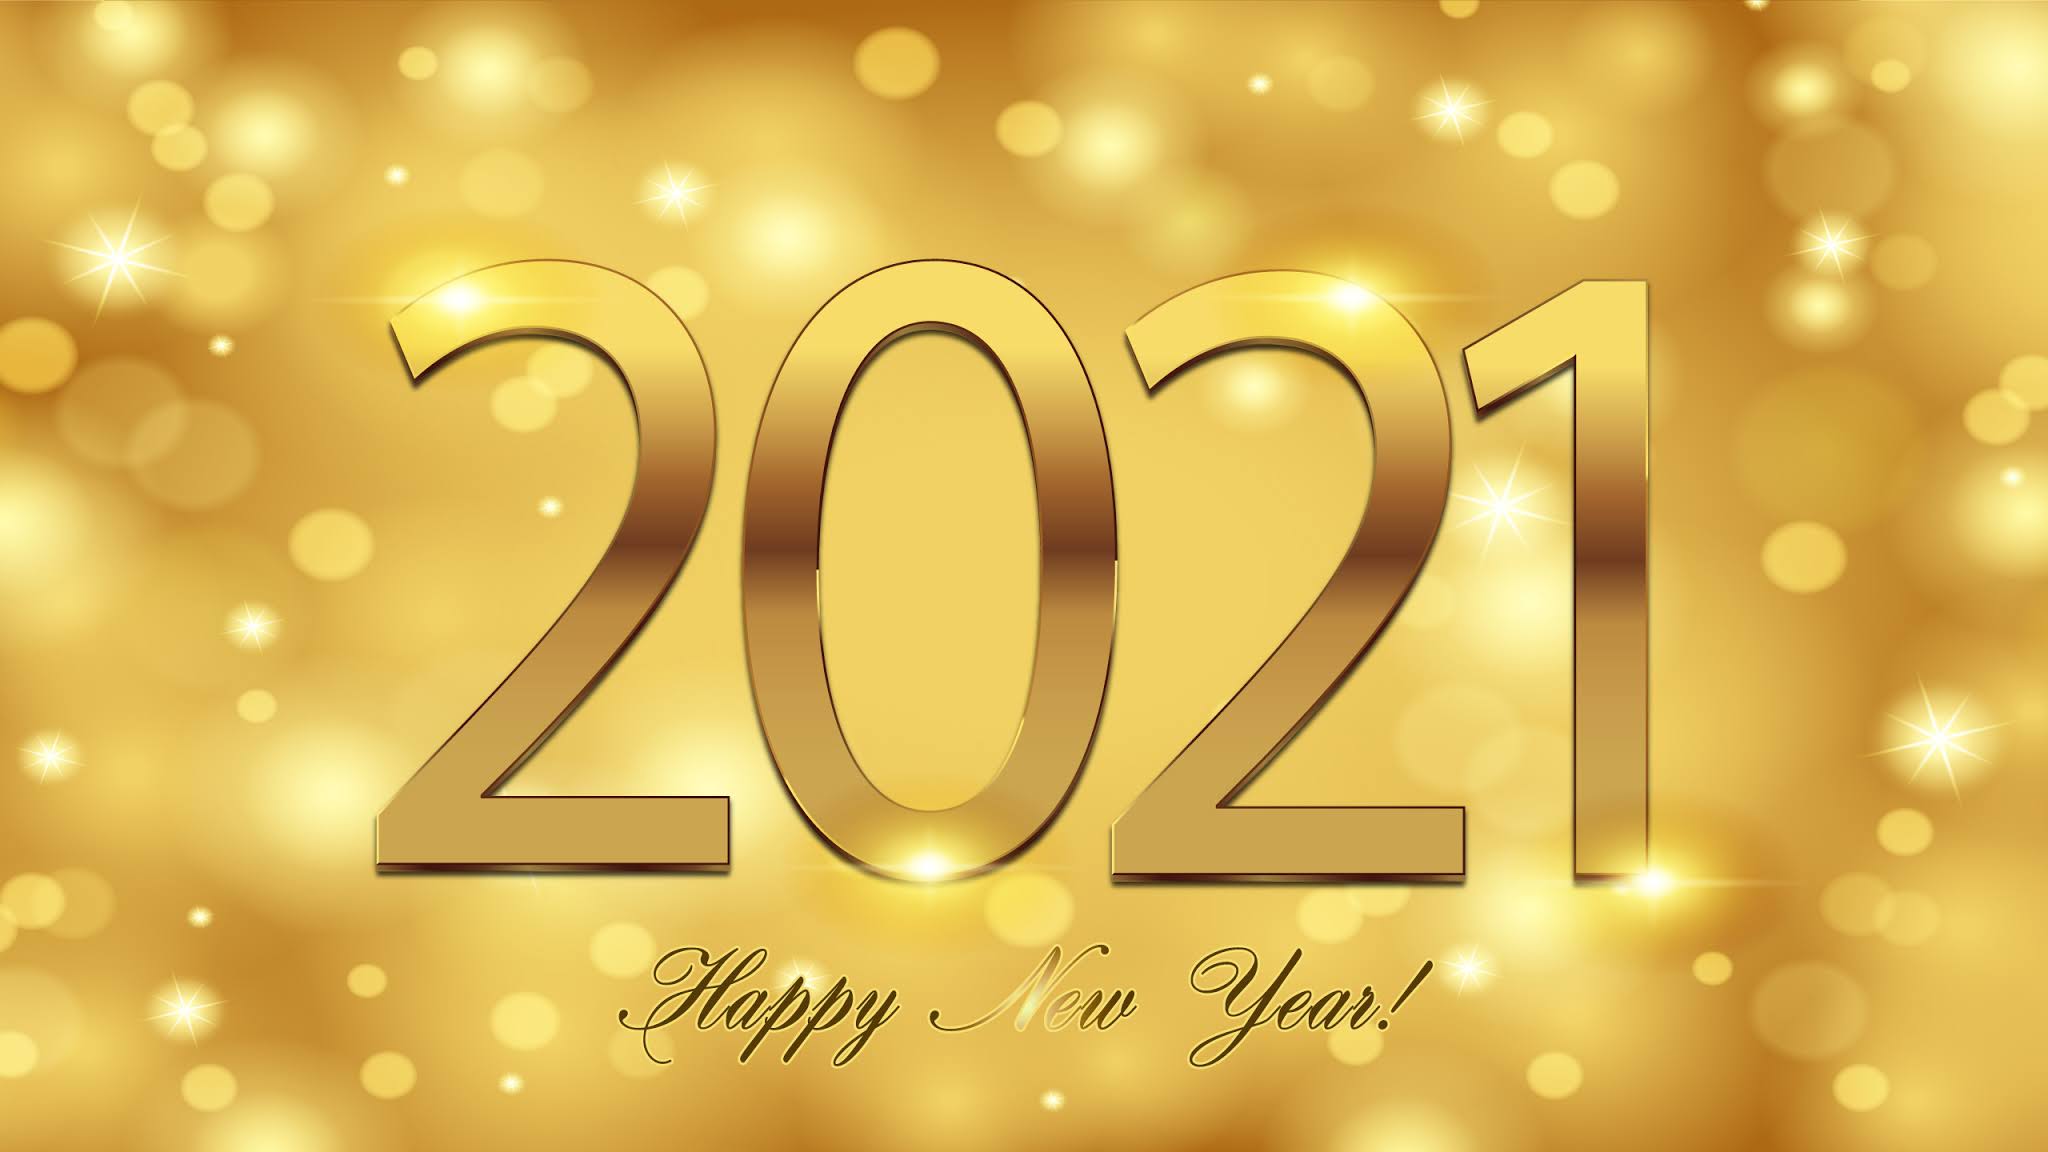 2048x1152 Happy New Year 2022 Background Hd Image